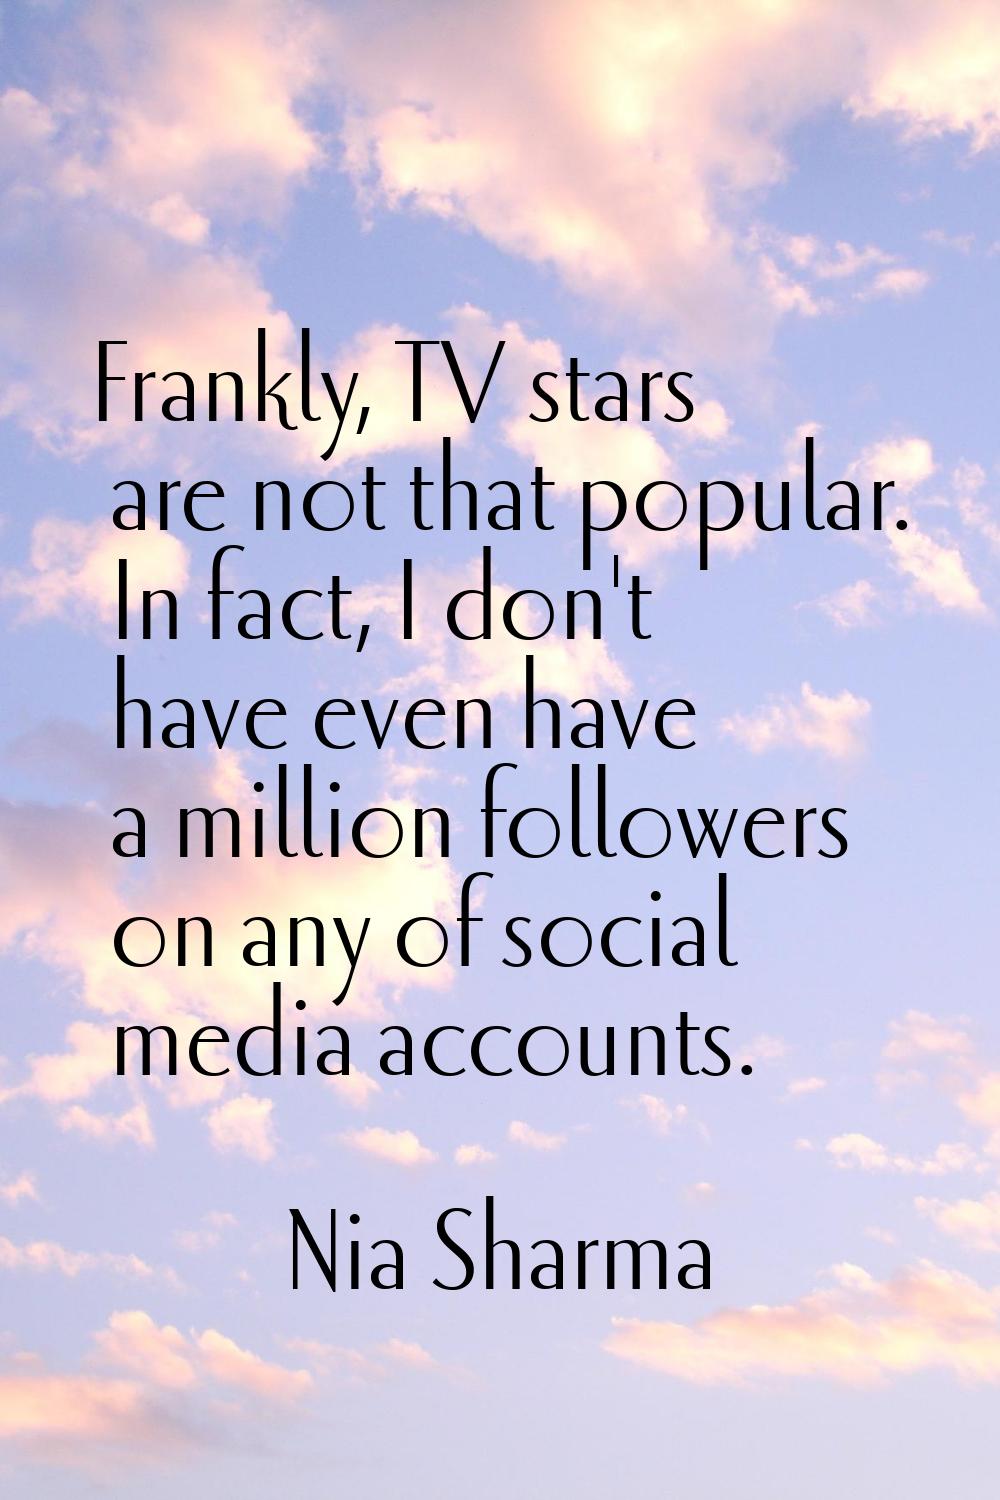 Frankly, TV stars are not that popular. In fact, I don't have even have a million followers on any 